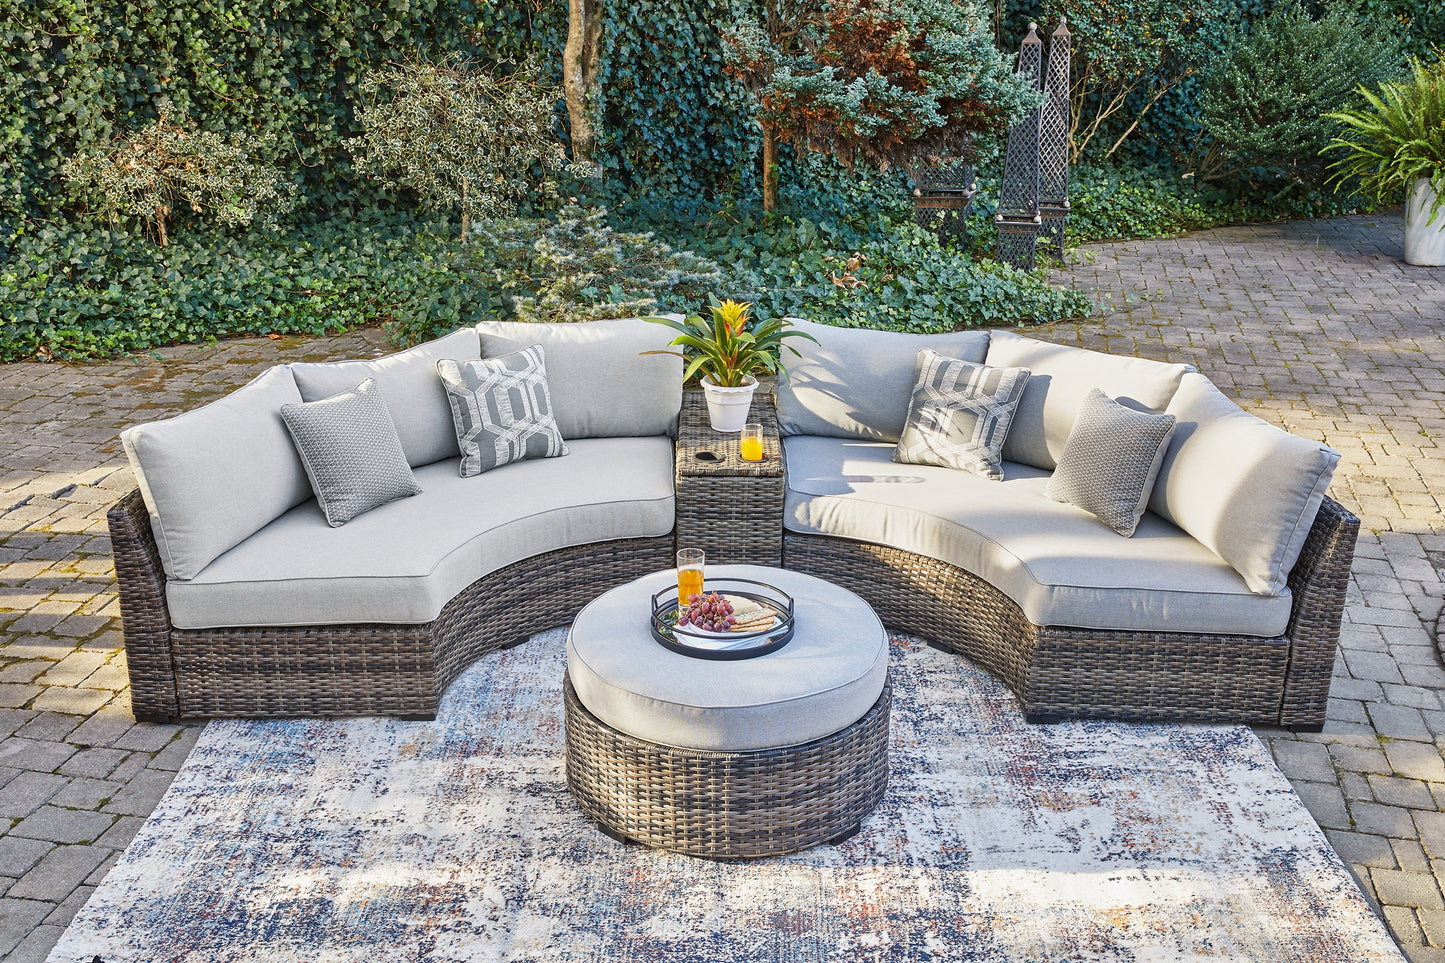 Harbor Court 3-Piece Outdoor Sectional with Ottoman